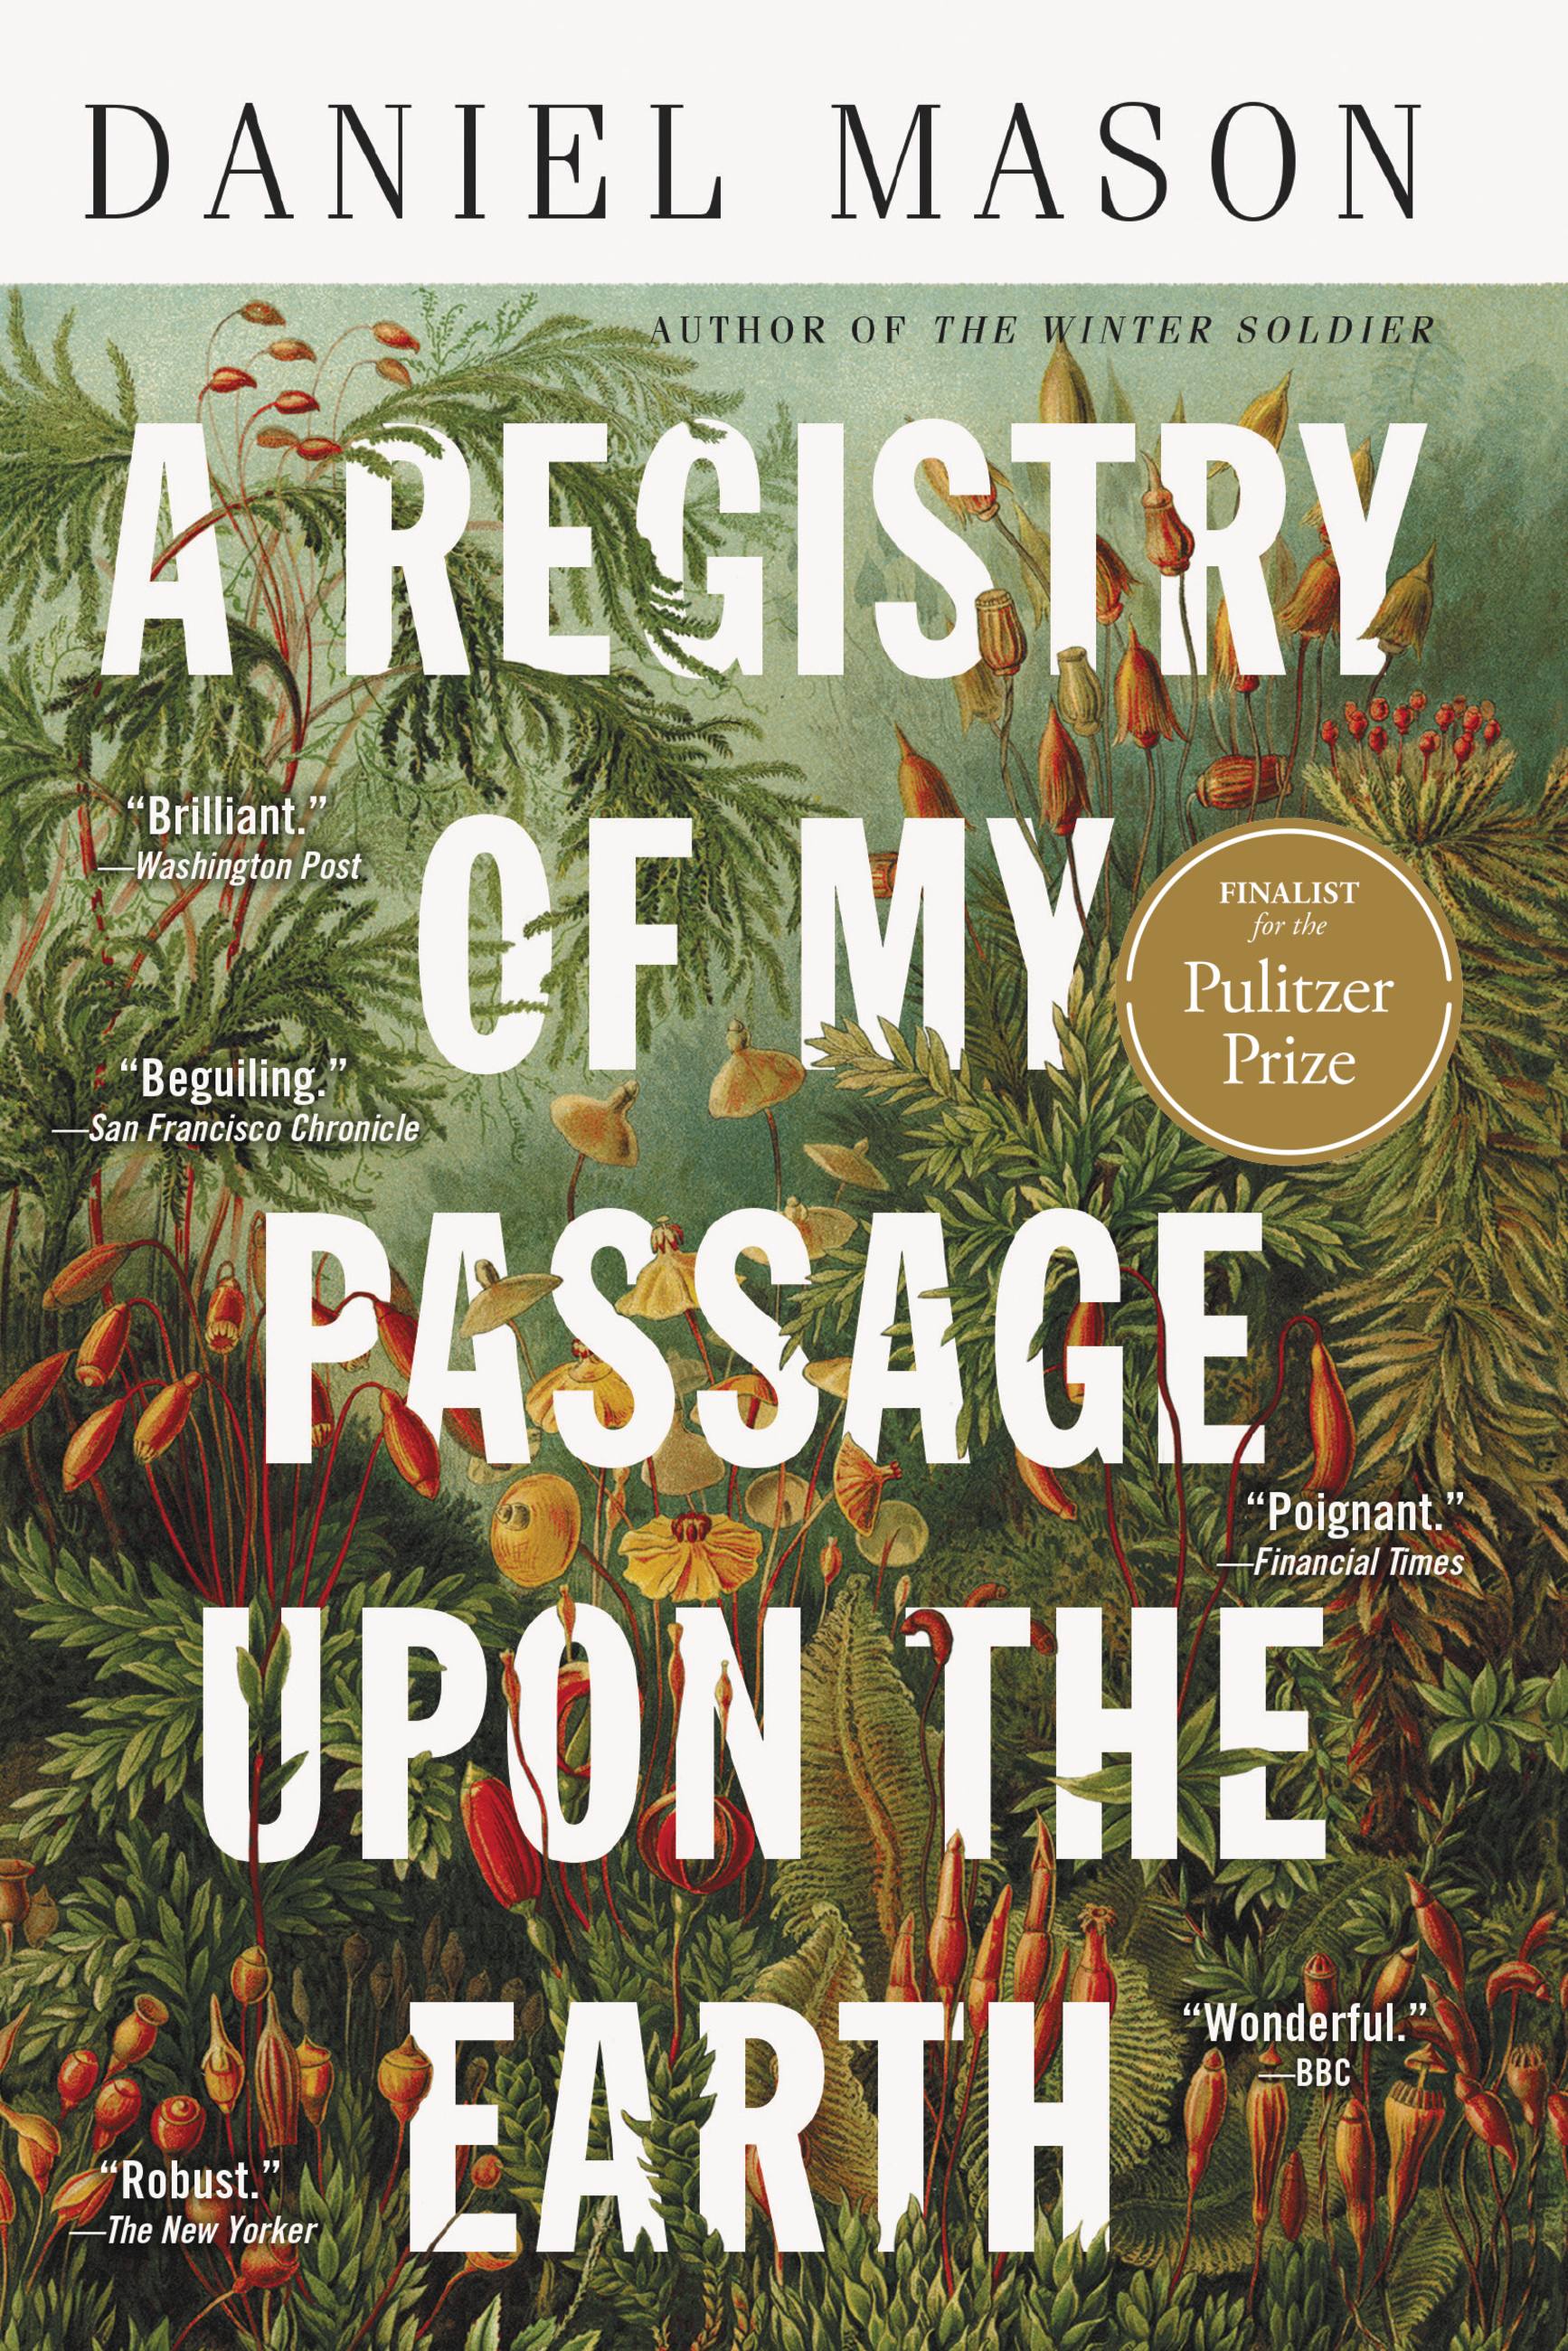 affald Streng synonymordbog A Registry of My Passage upon the Earth by Daniel Mason | Hachette Book  Group